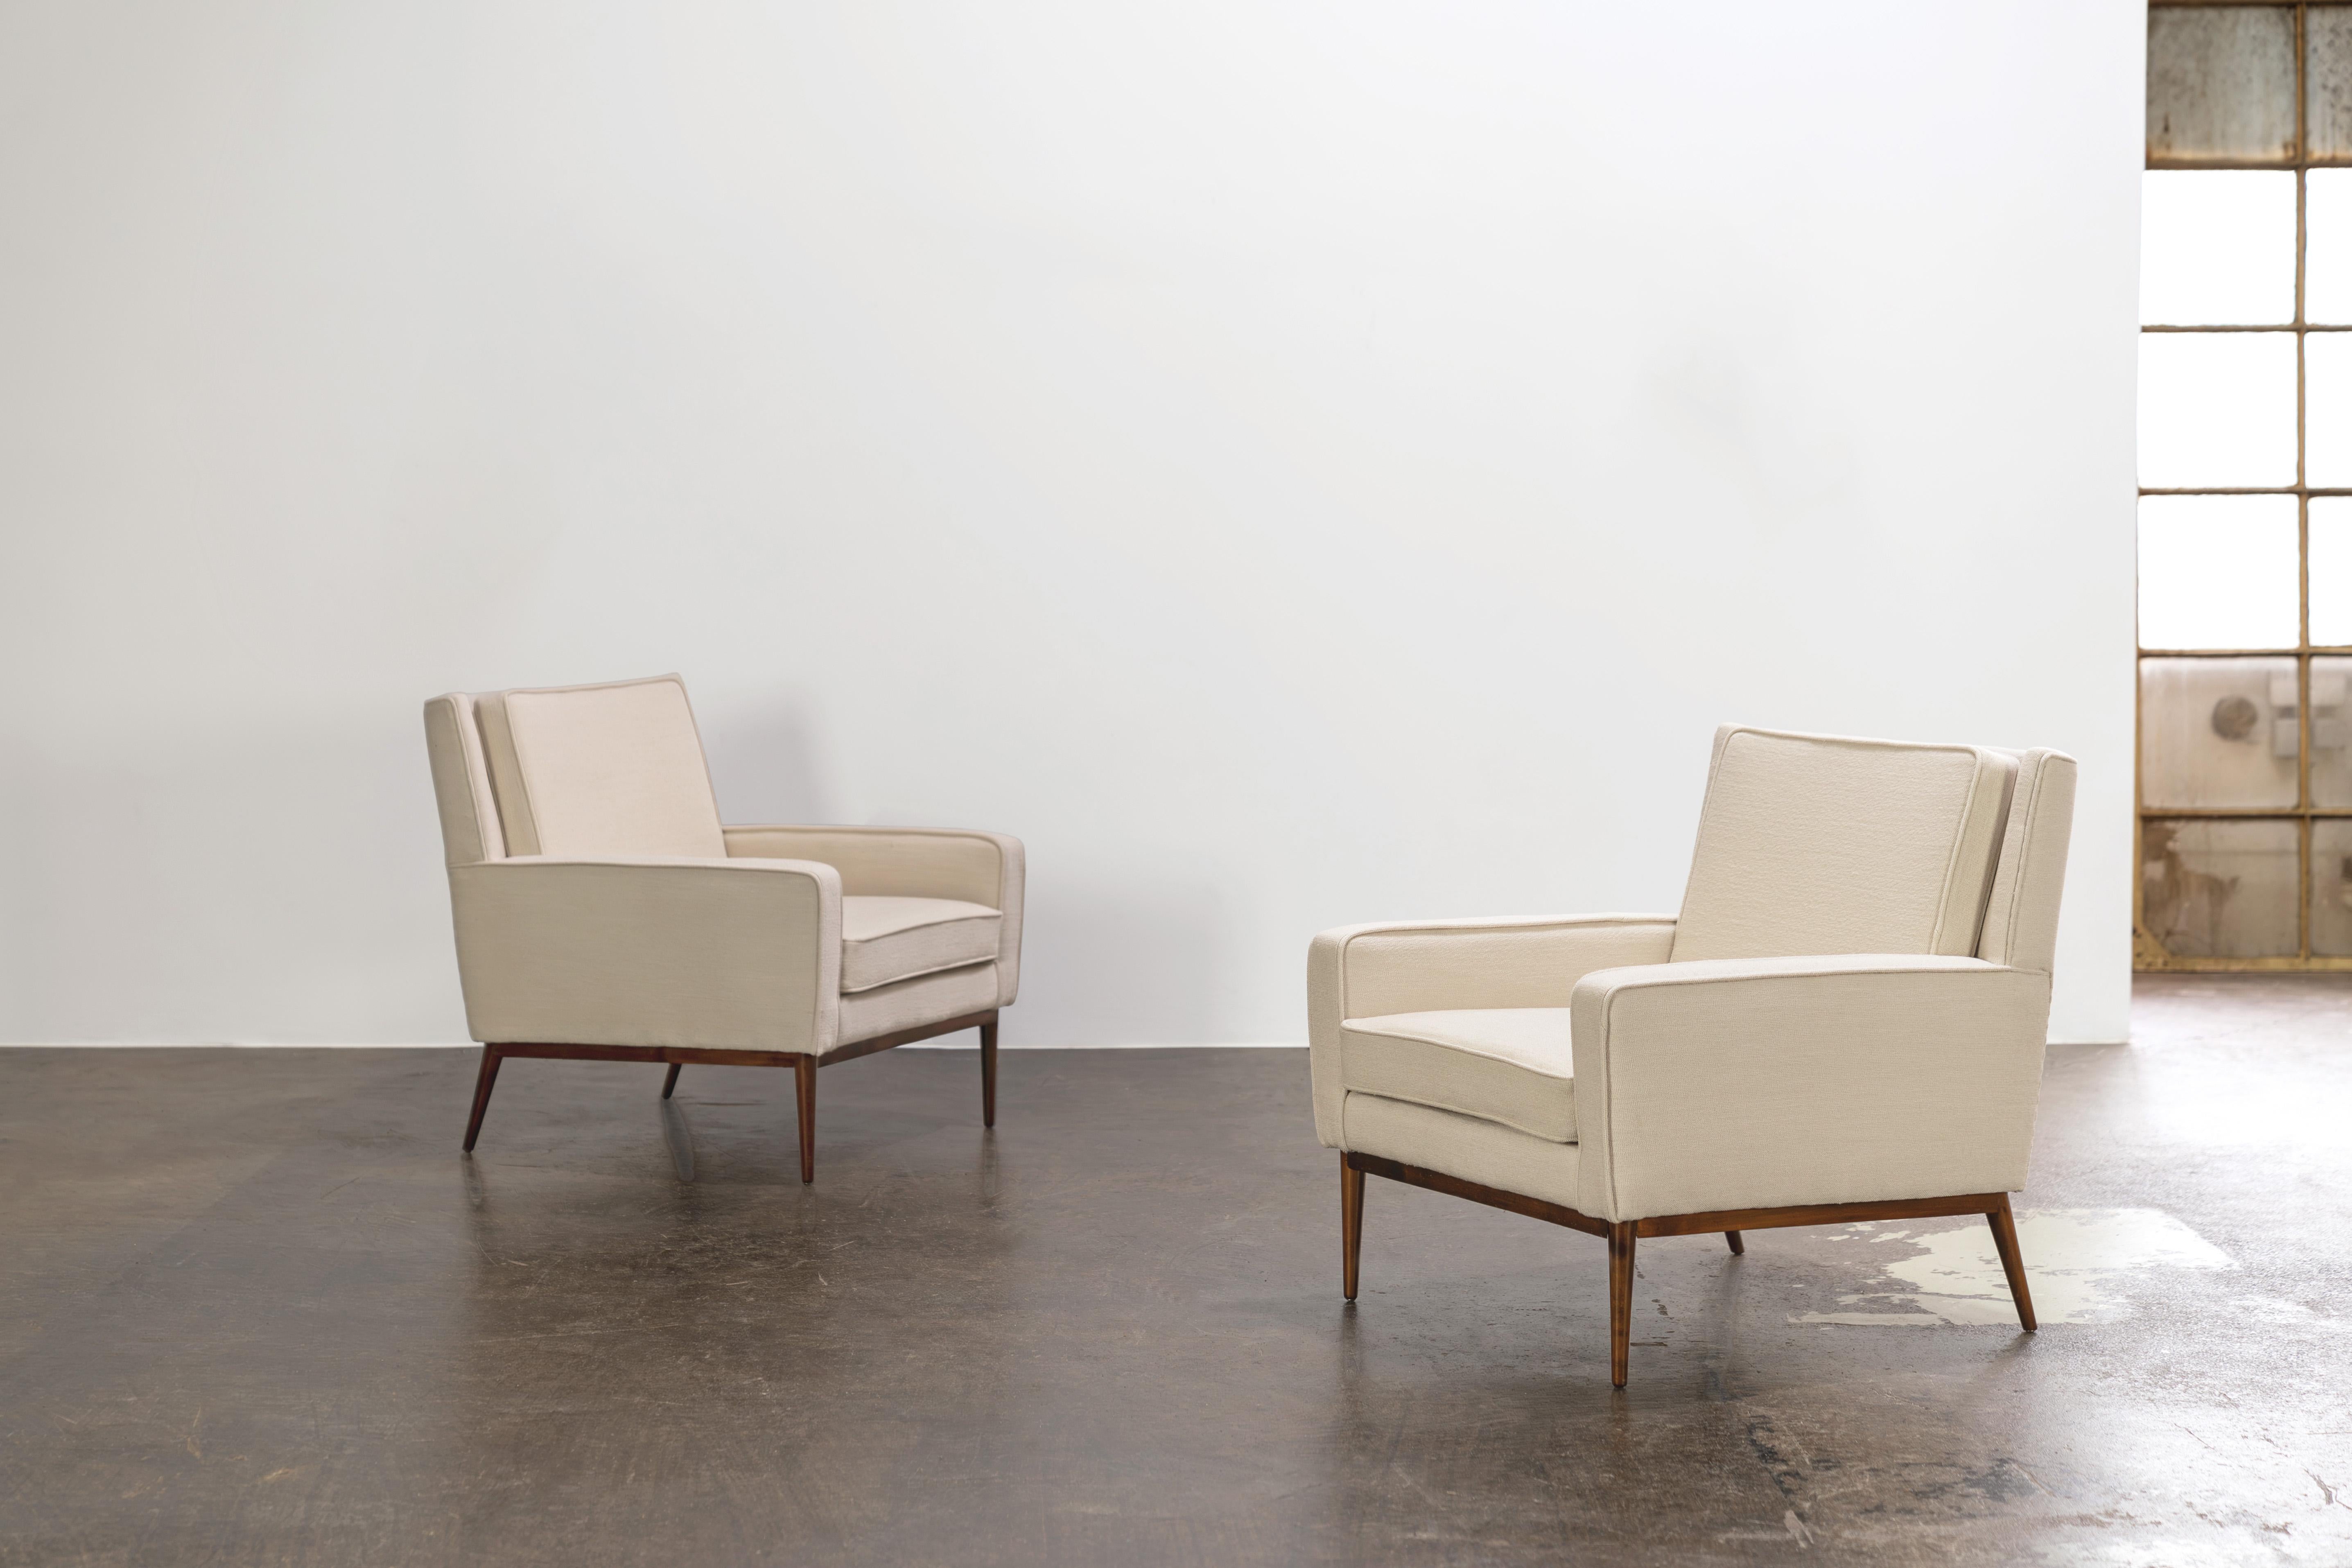 Very comfortable and attractive pair of lounge chairs from the 1950s by Paul McCobb. The armchairs are newly upholstered and covered with a high-quality, off-white wool fabric.

Model 300